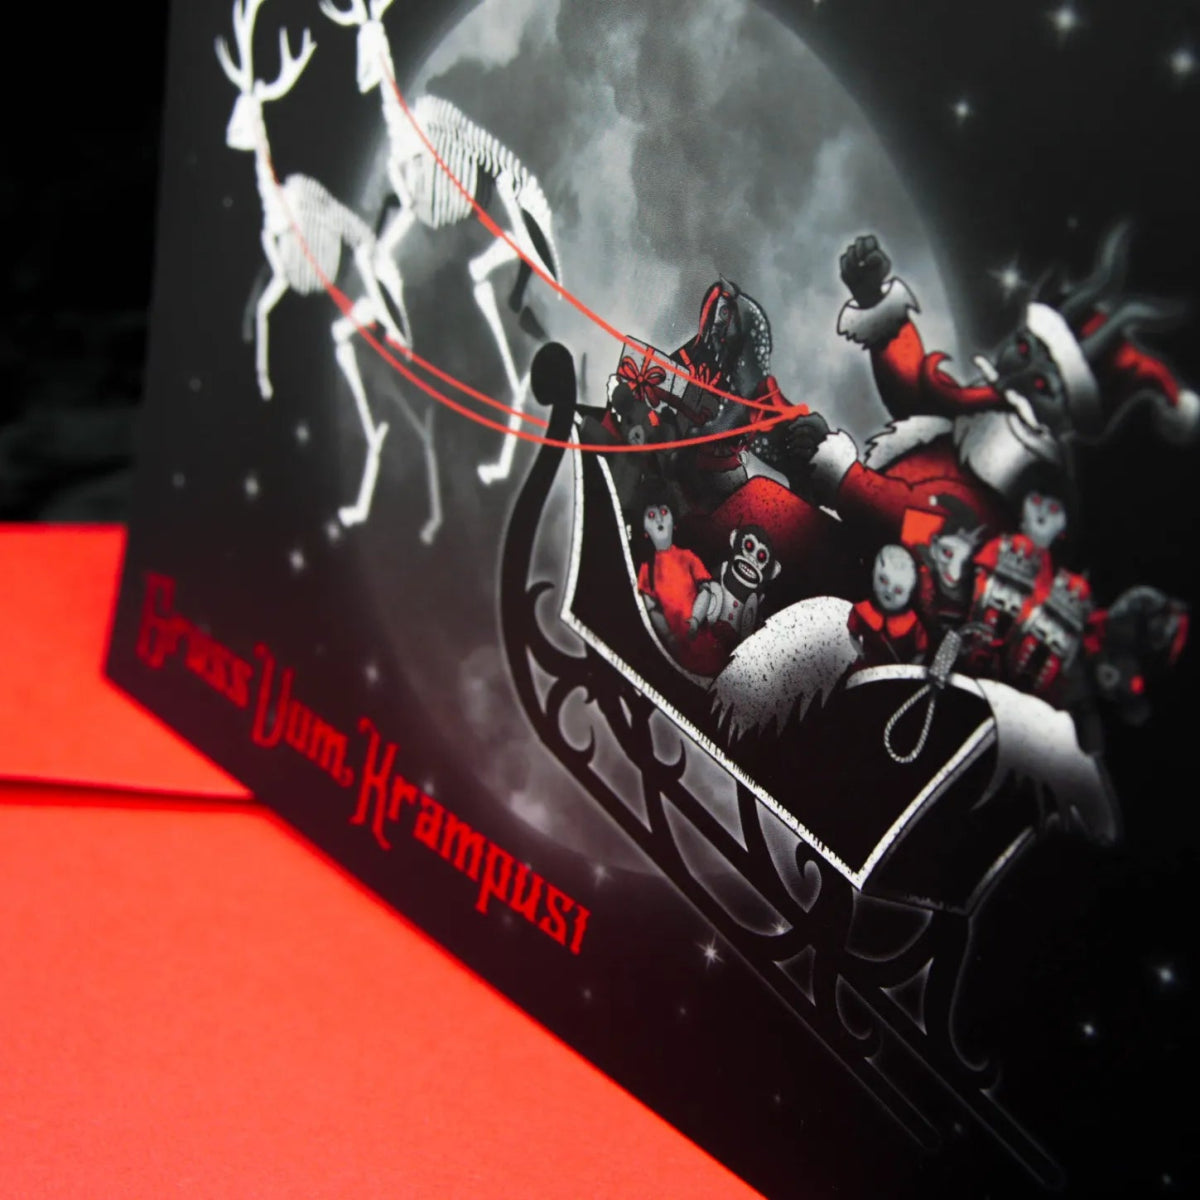 Greetings From Krampus Christmas Greetings Card - The Gothic Stationery Company - Greetings Card